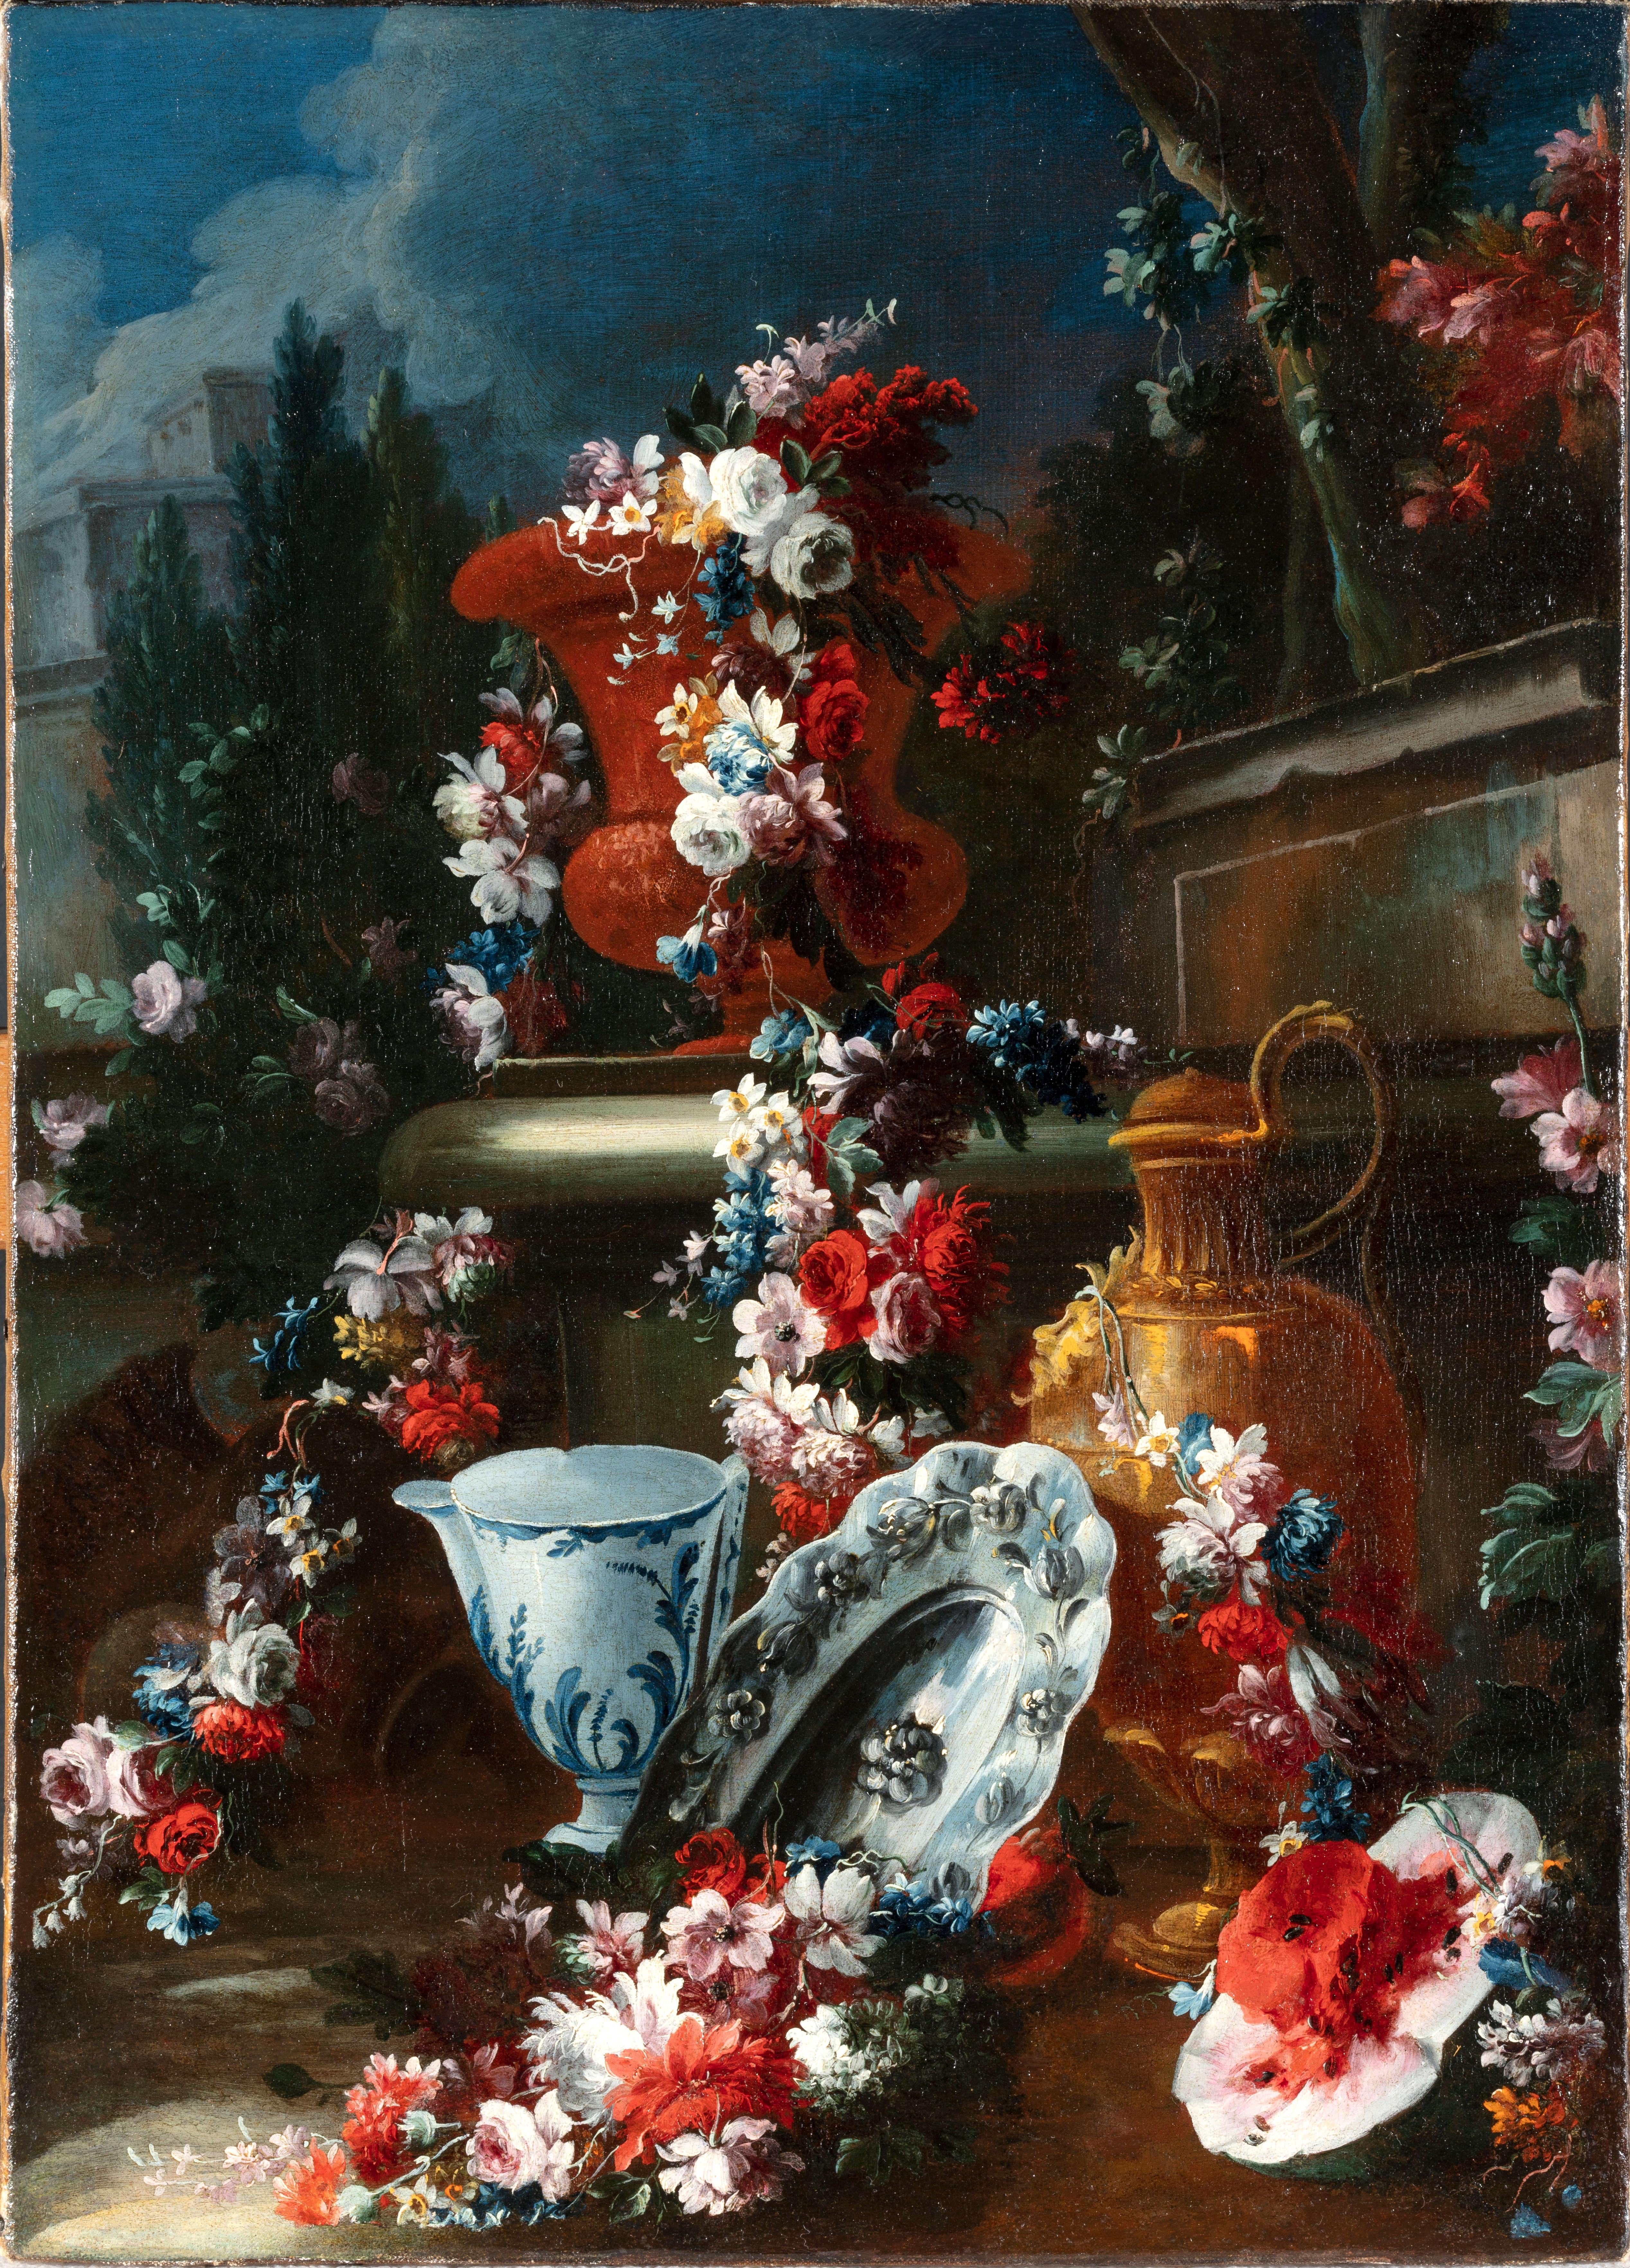 Francesco Lavagna (Naples 1684-1724)
Still life with arrangement of flowers and watermelon
Oil on canvas.
cm with frame H 75 x W 60 x D 7. only canvas cm W 39 x H 54 

The painting, of remarkable quality and in good state of maintenance, represents